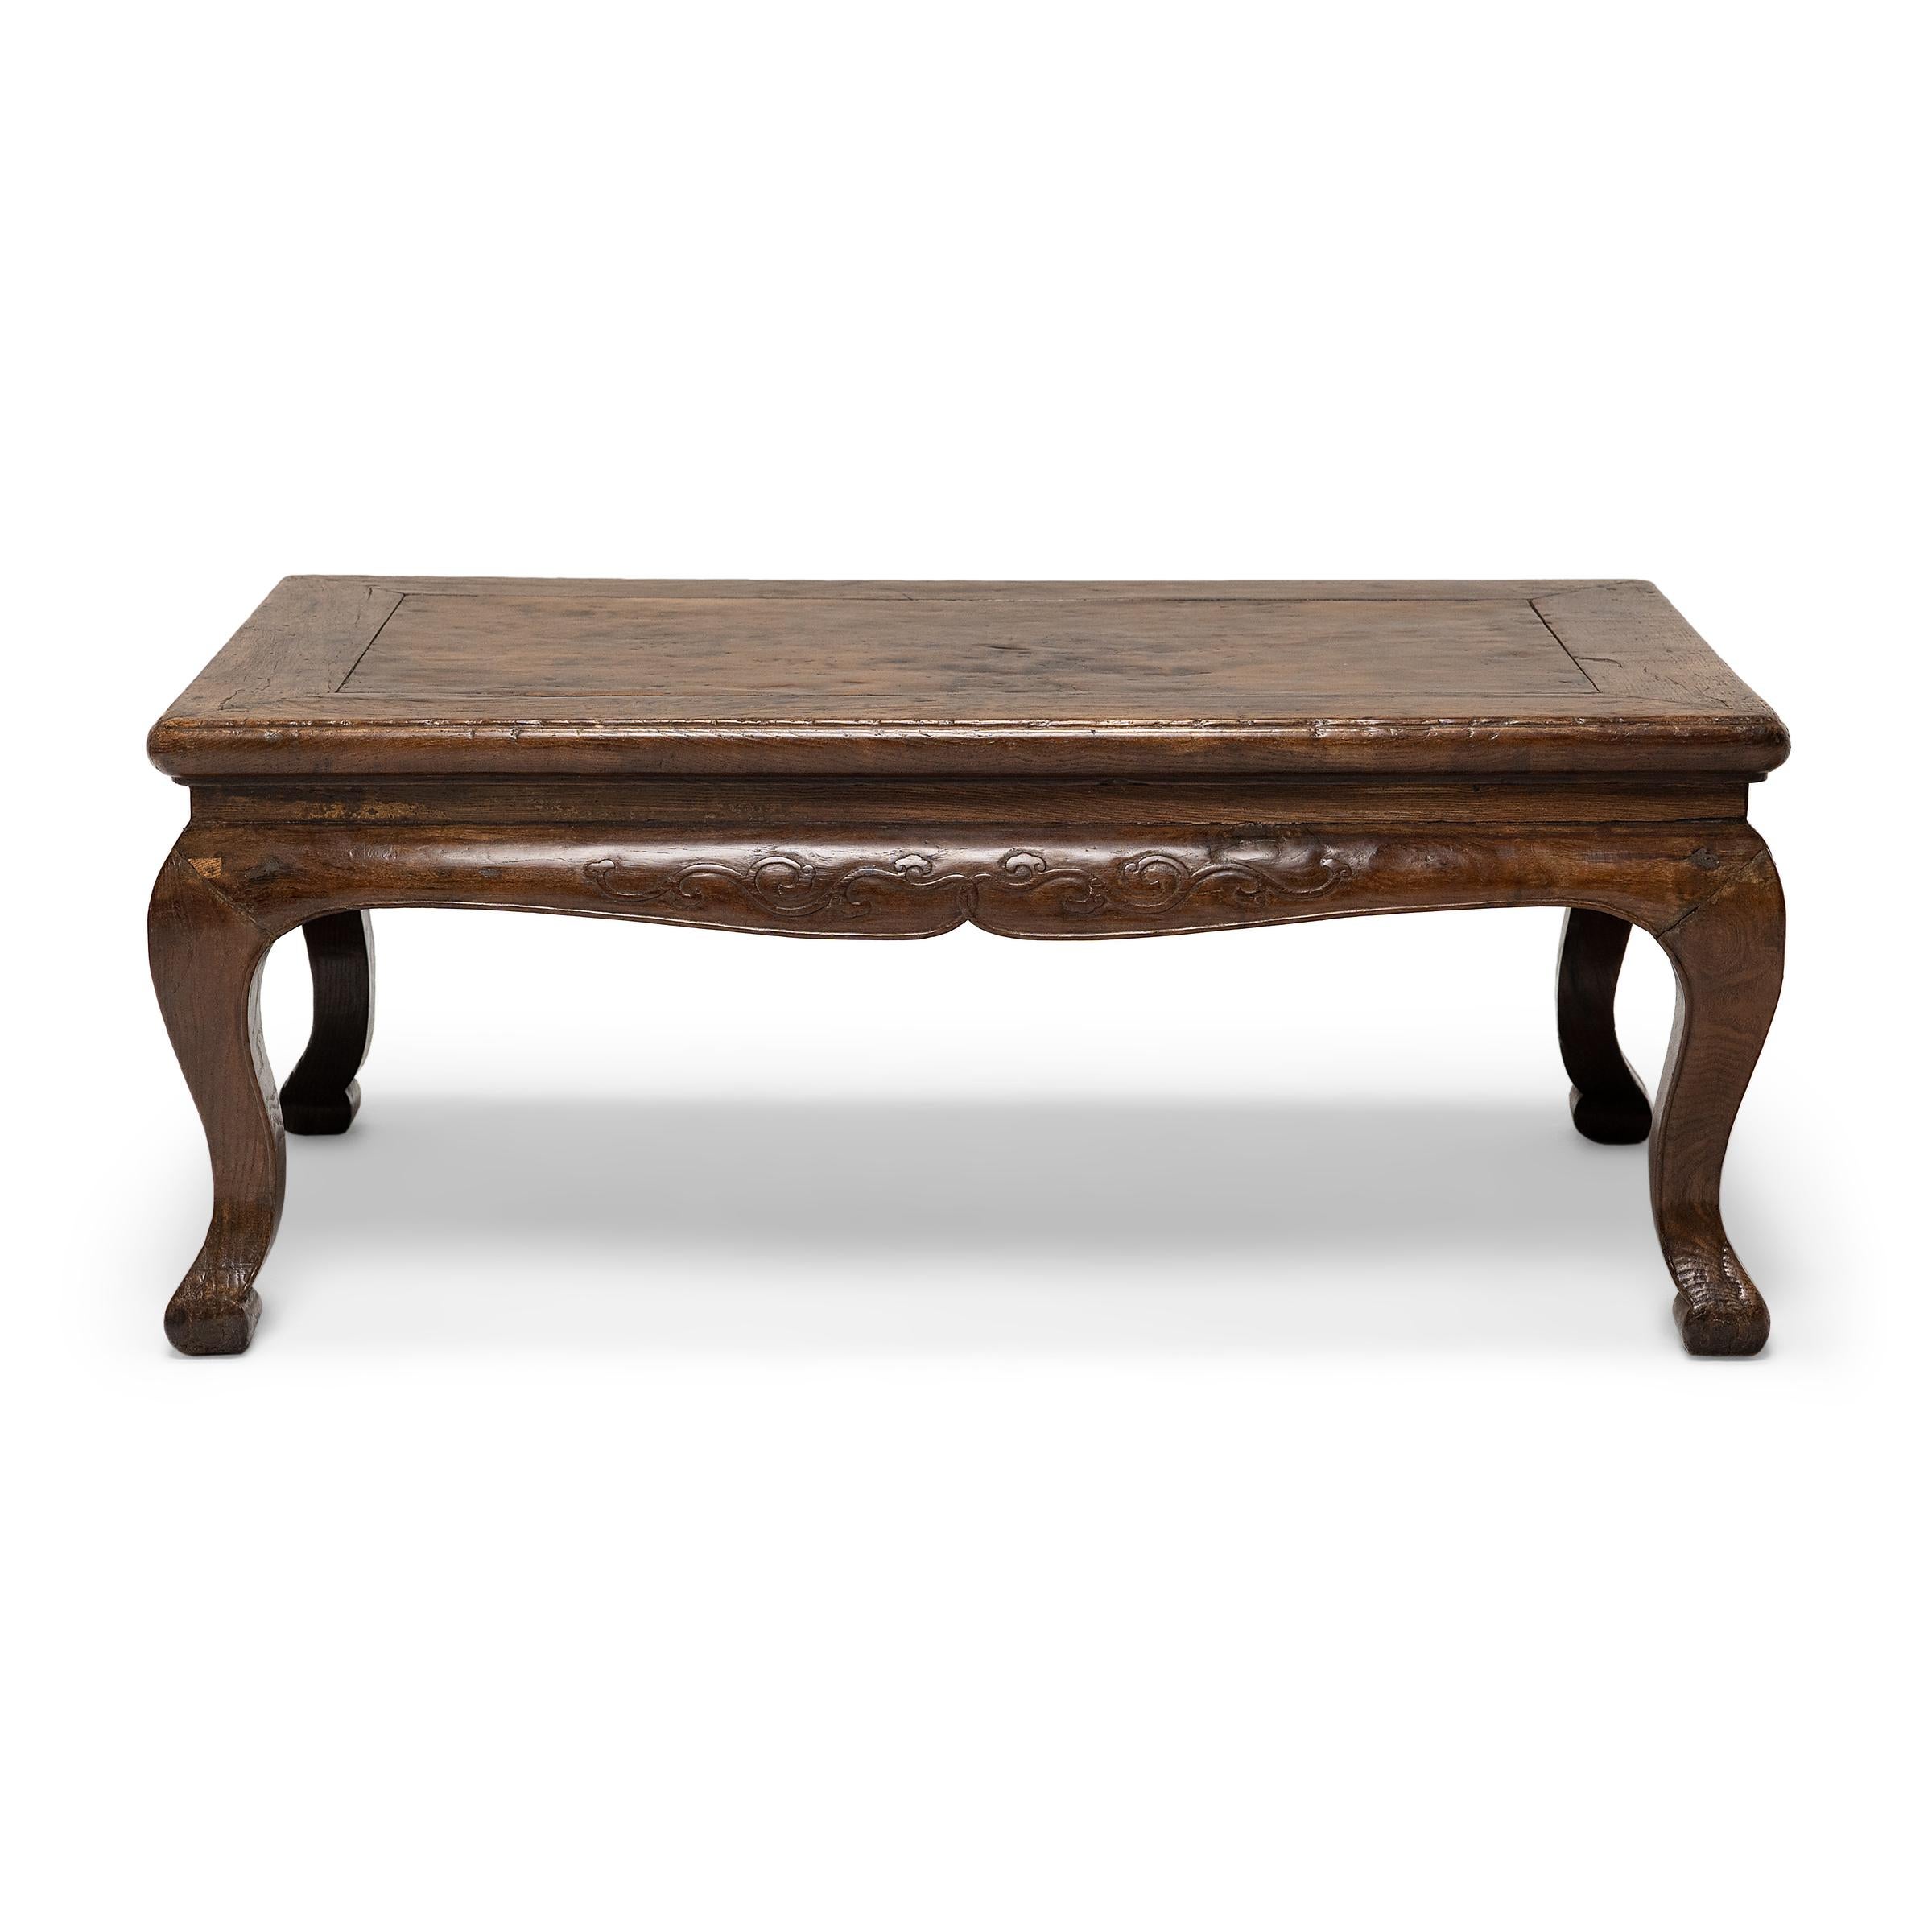 Qing Chinese Low Burl Top Kang Table, c. 1850 For Sale